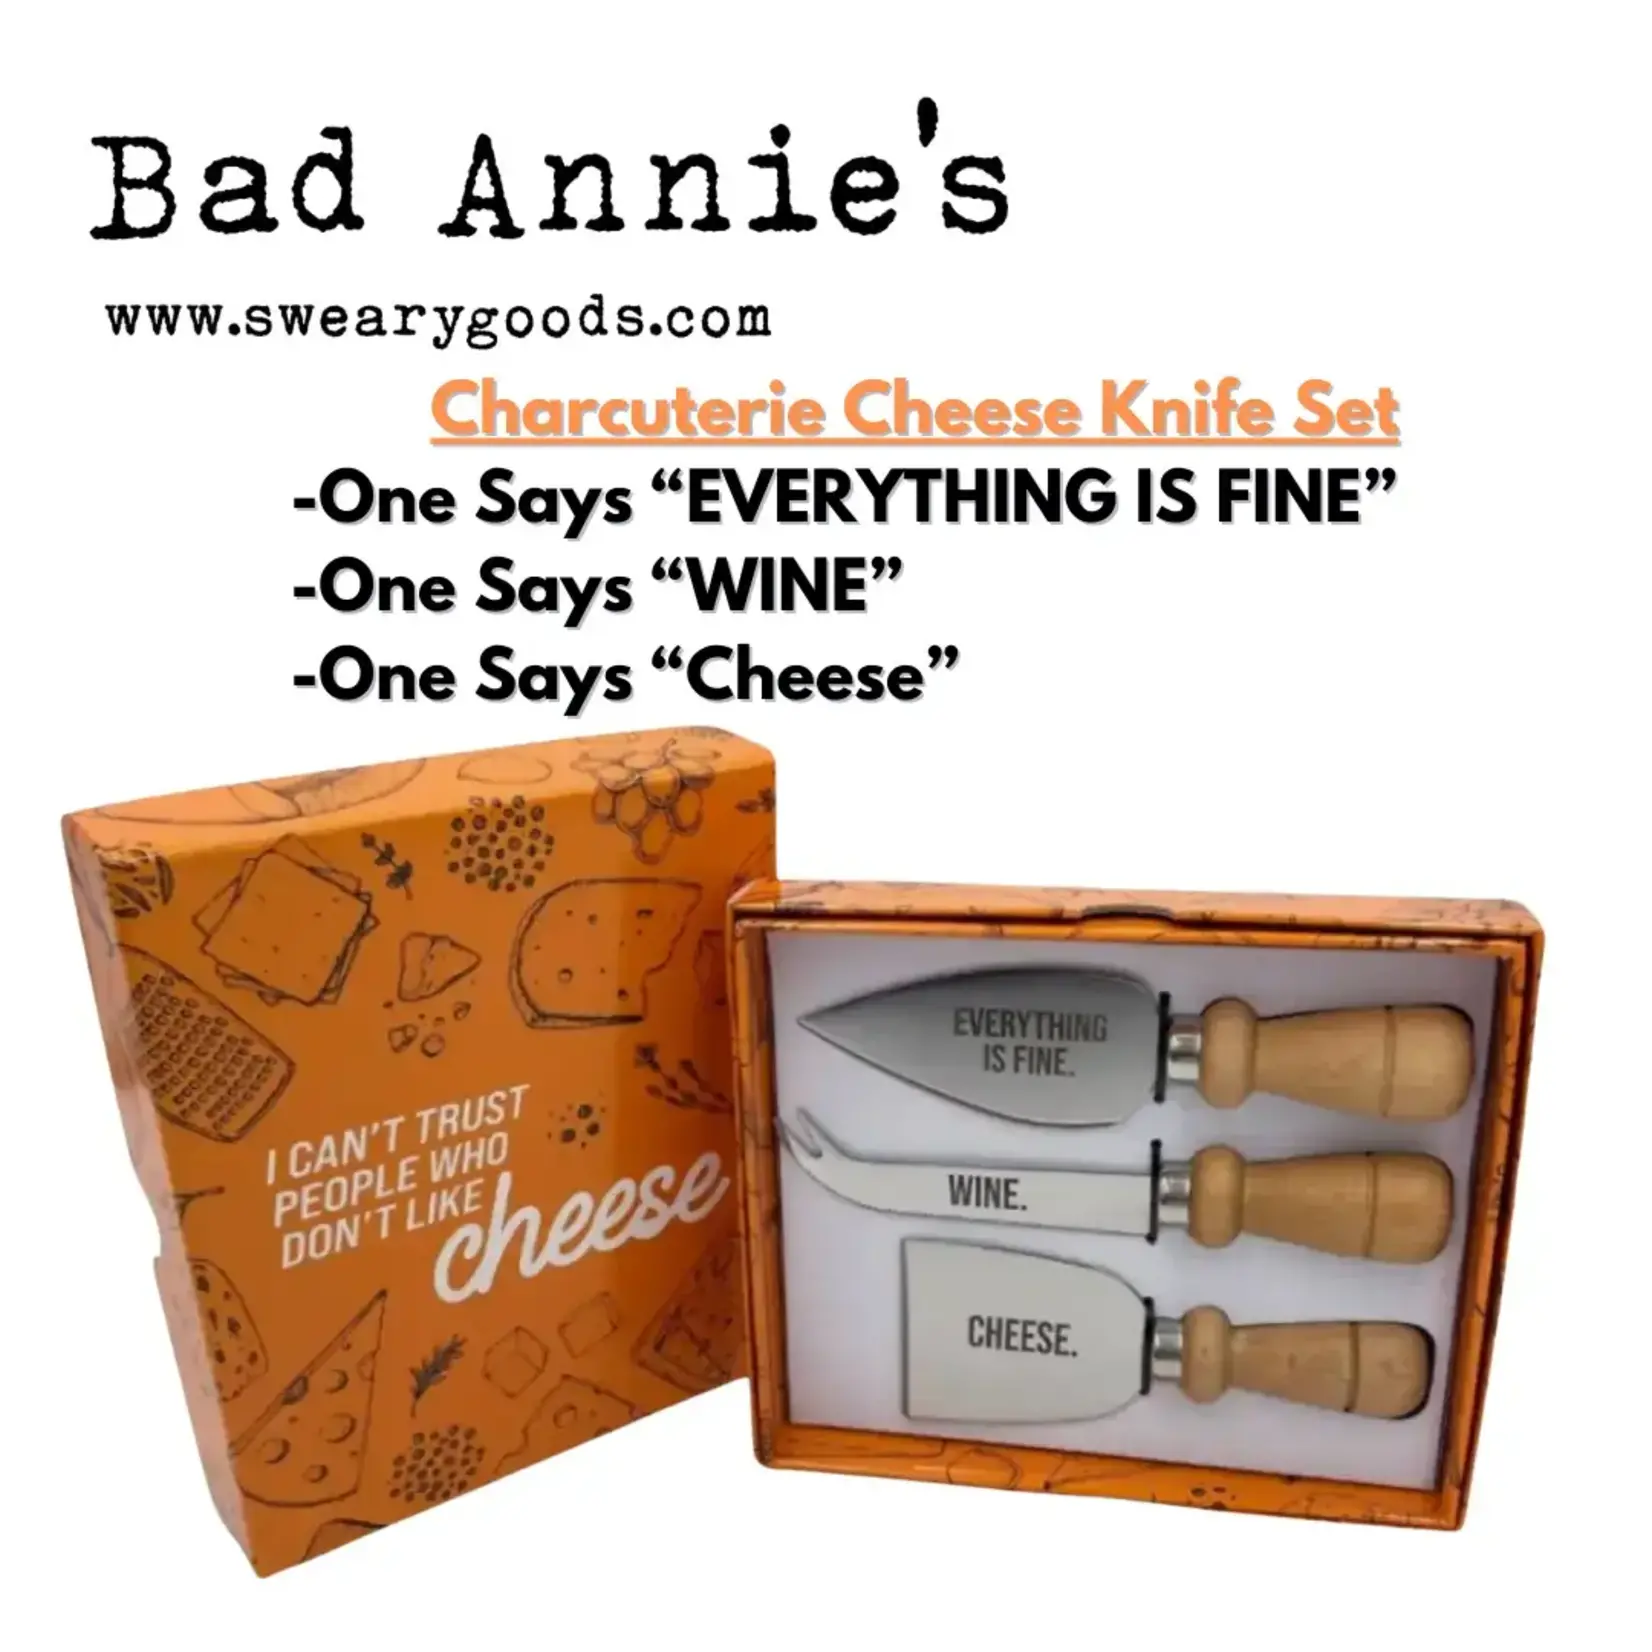 Cheese Knife Set - Boxed - "I Can't Trust People Who Don't Like Cheese"